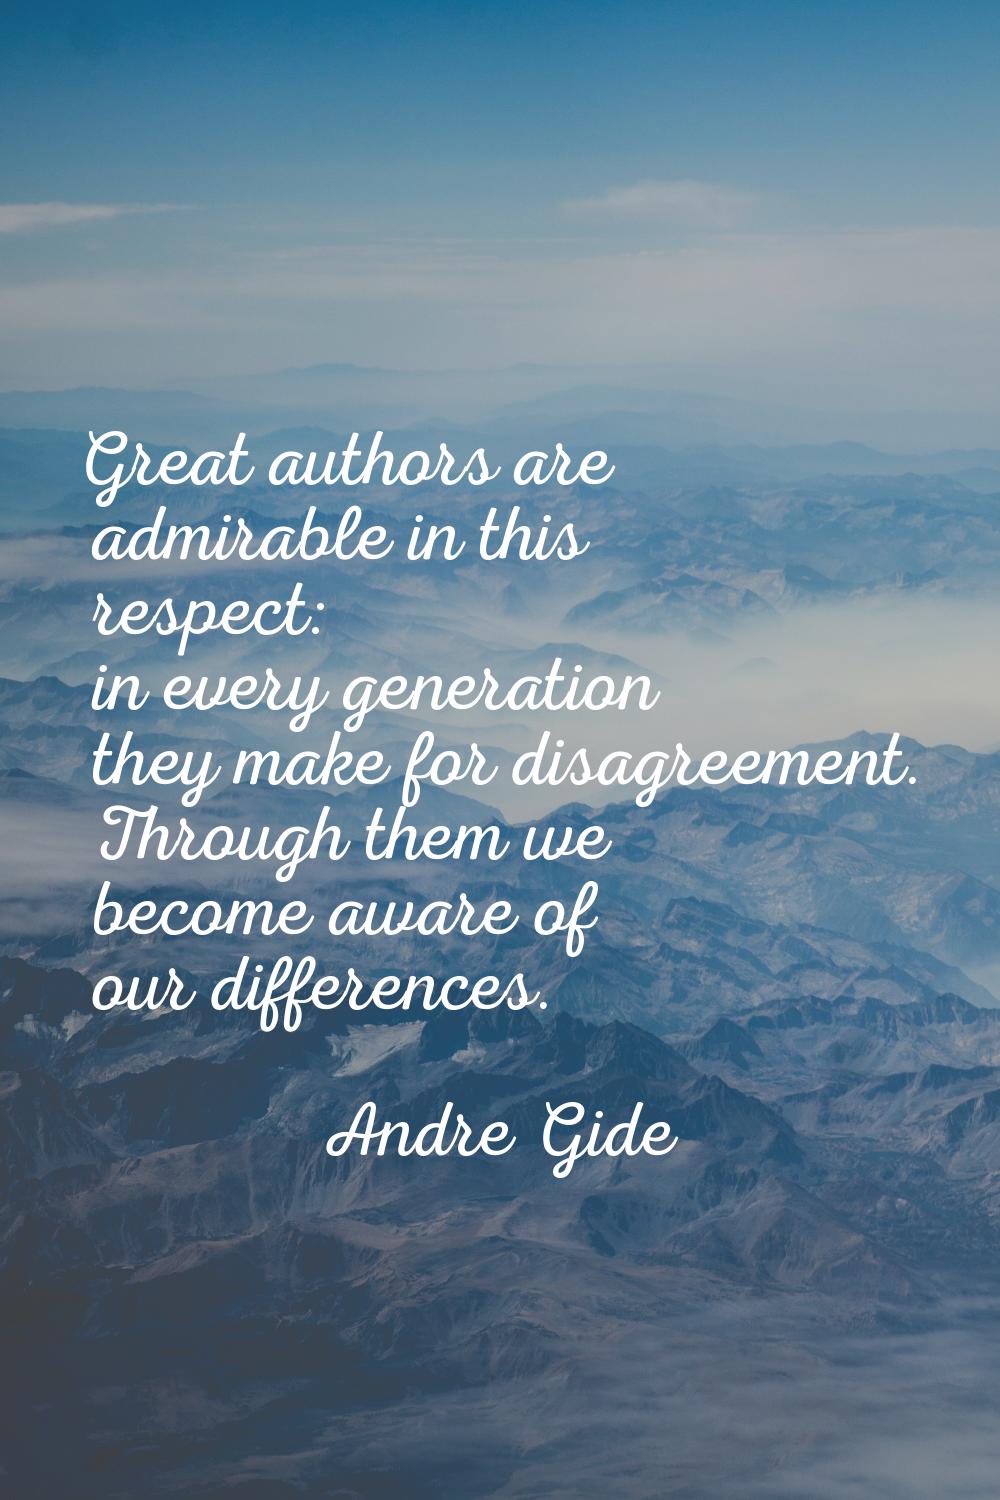 Great authors are admirable in this respect: in every generation they make for disagreement. Throug